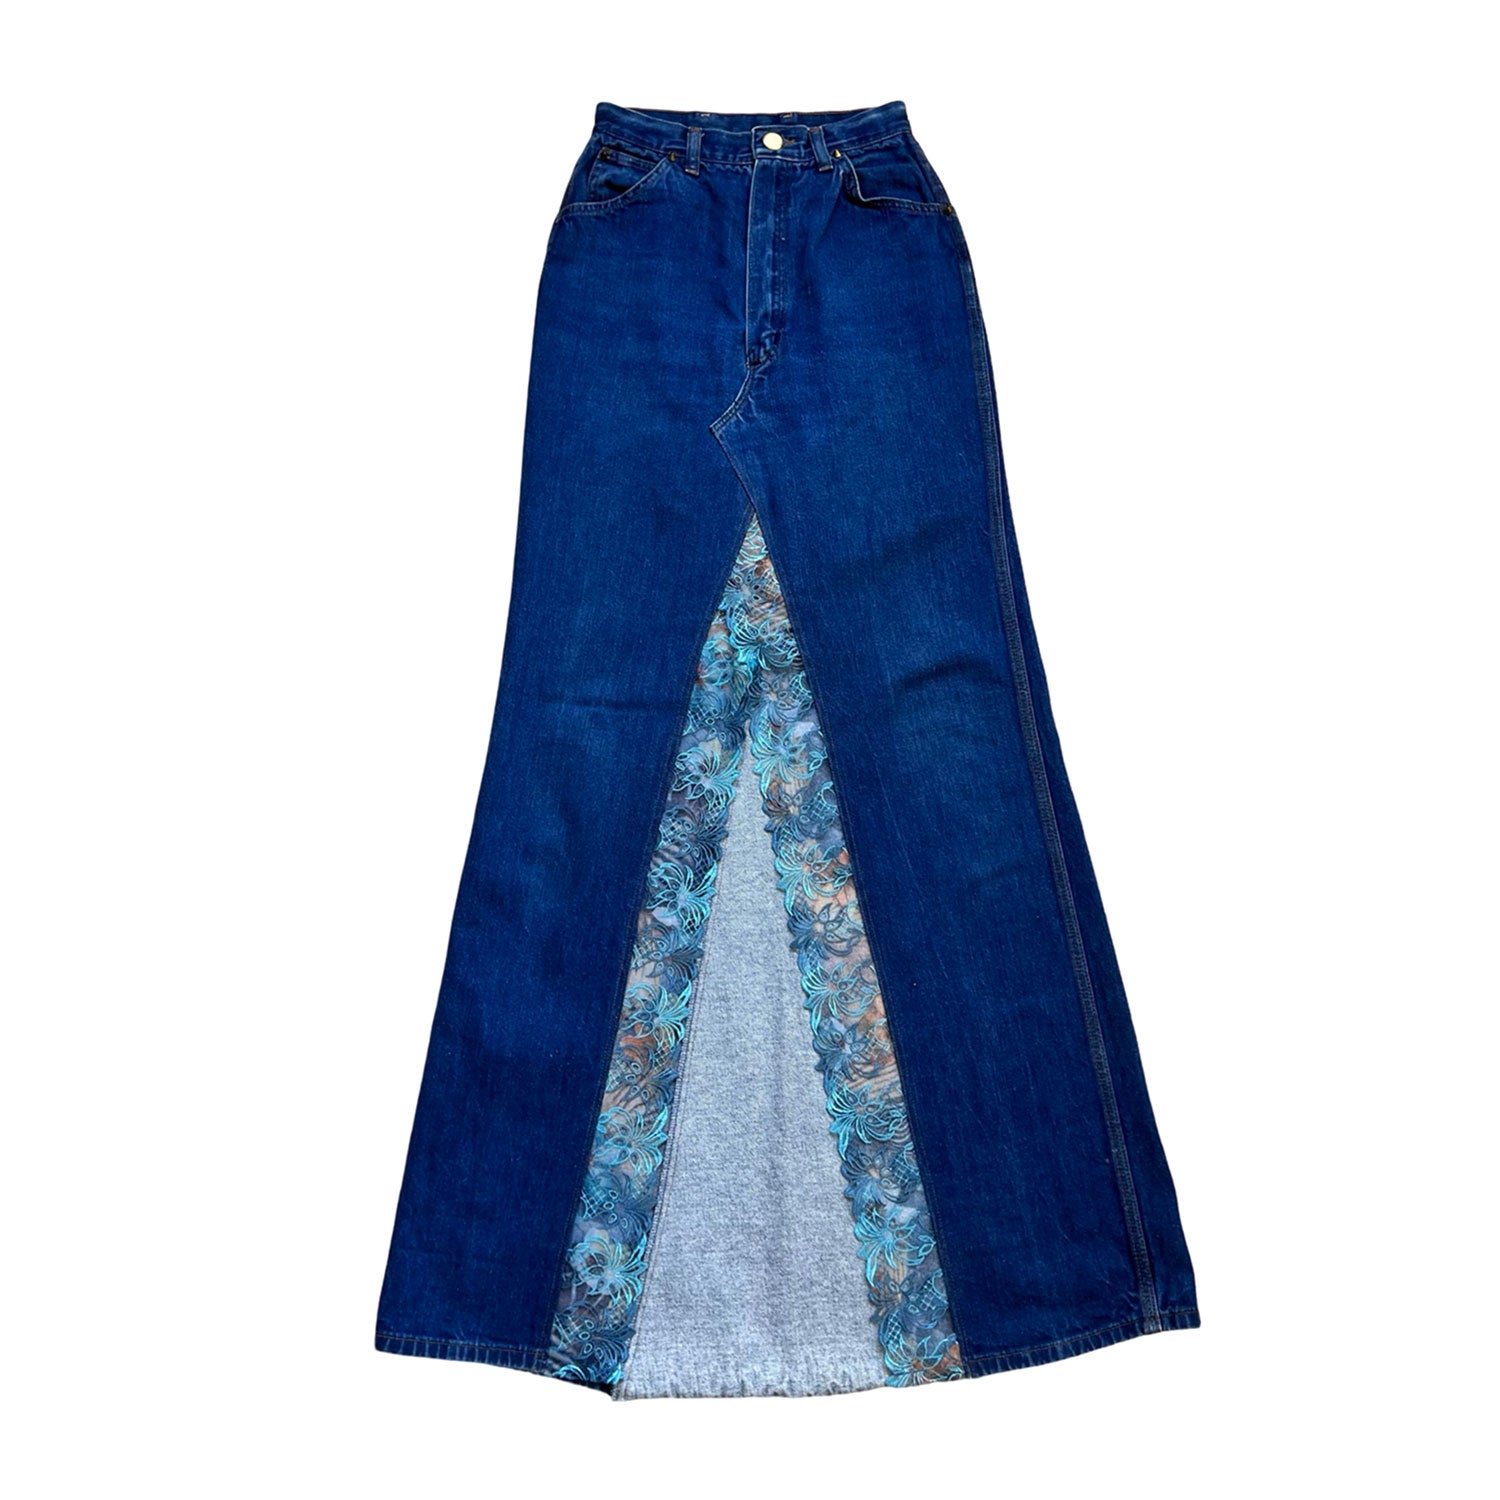 Embellished Denim Skirt In Blue With Blue Lace